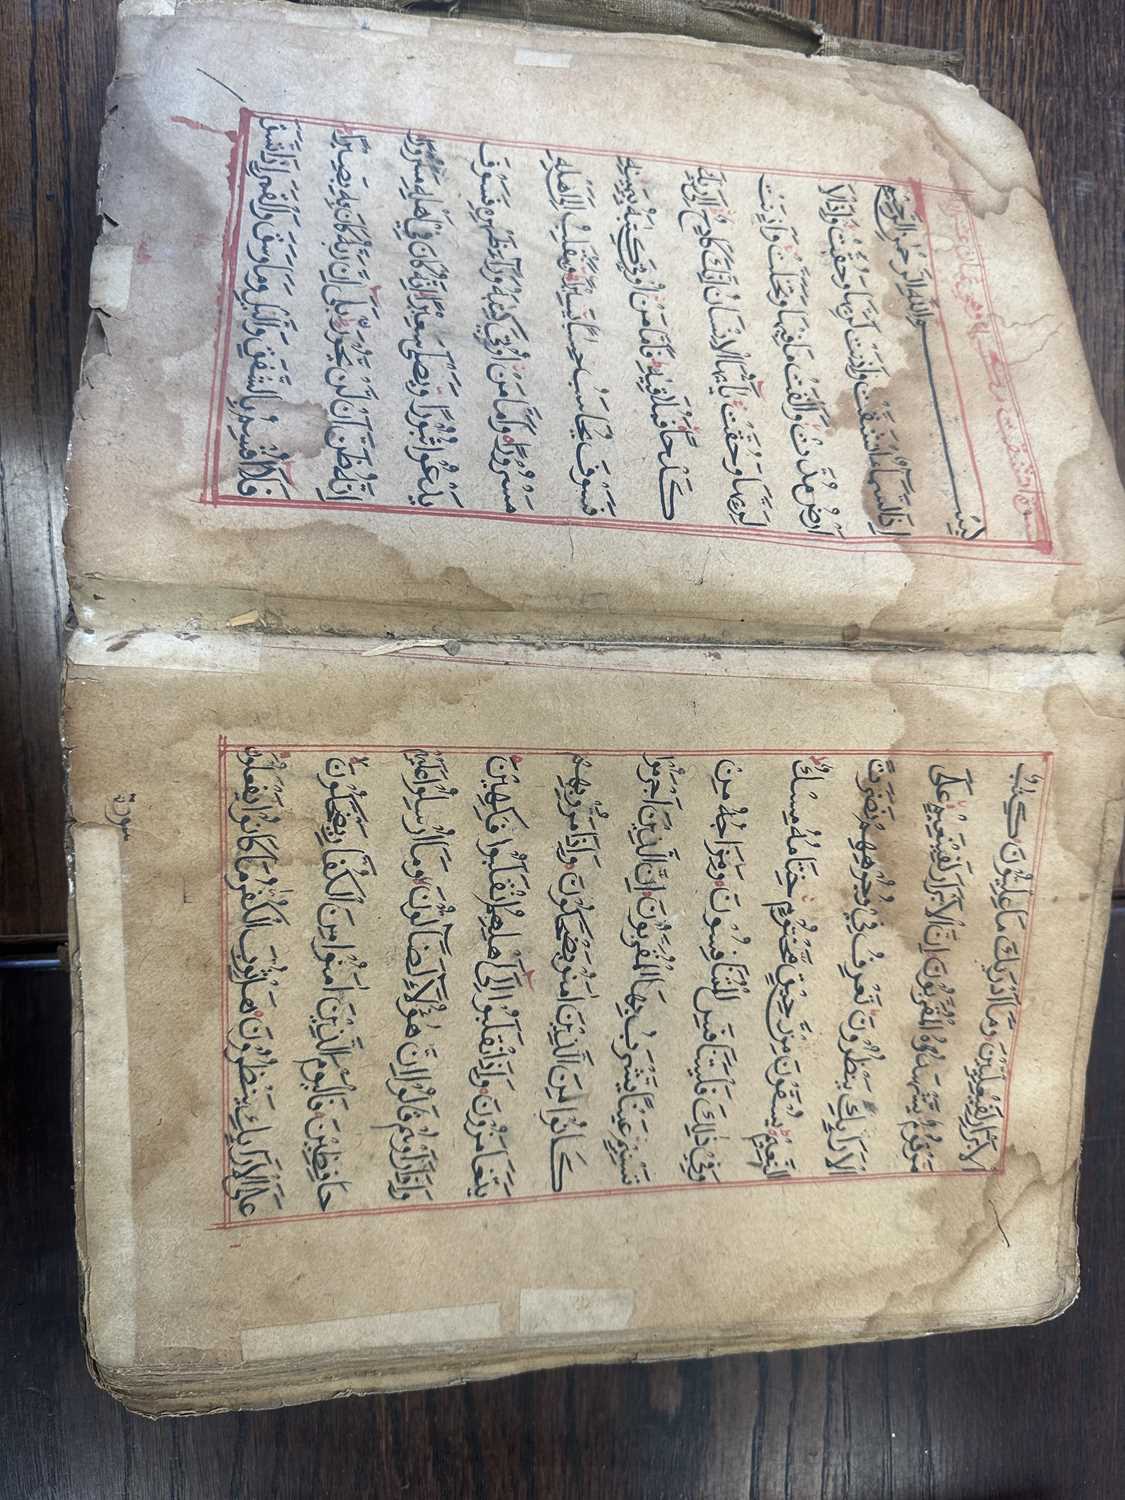 AN EARLY COPY OF THE KORAN LEATHER BOUND BOOK - Image 30 of 44